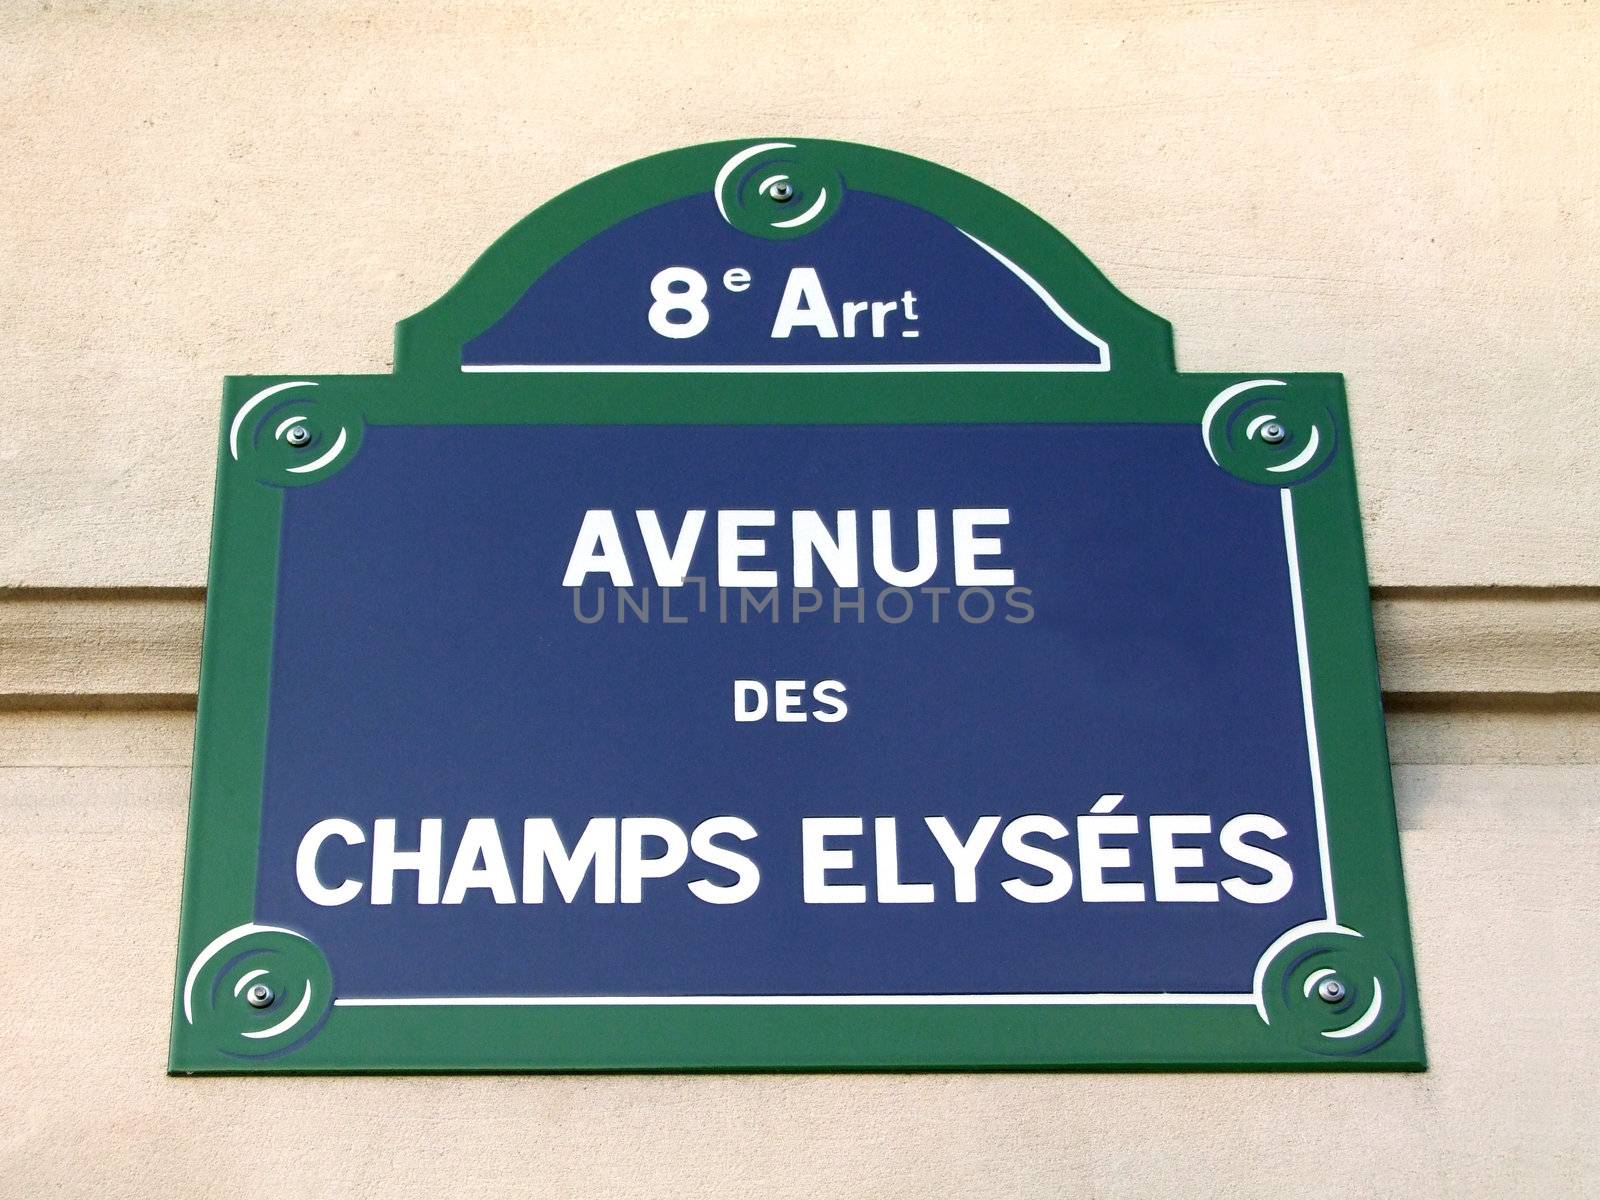 Champs Elysees by Teamarbeit